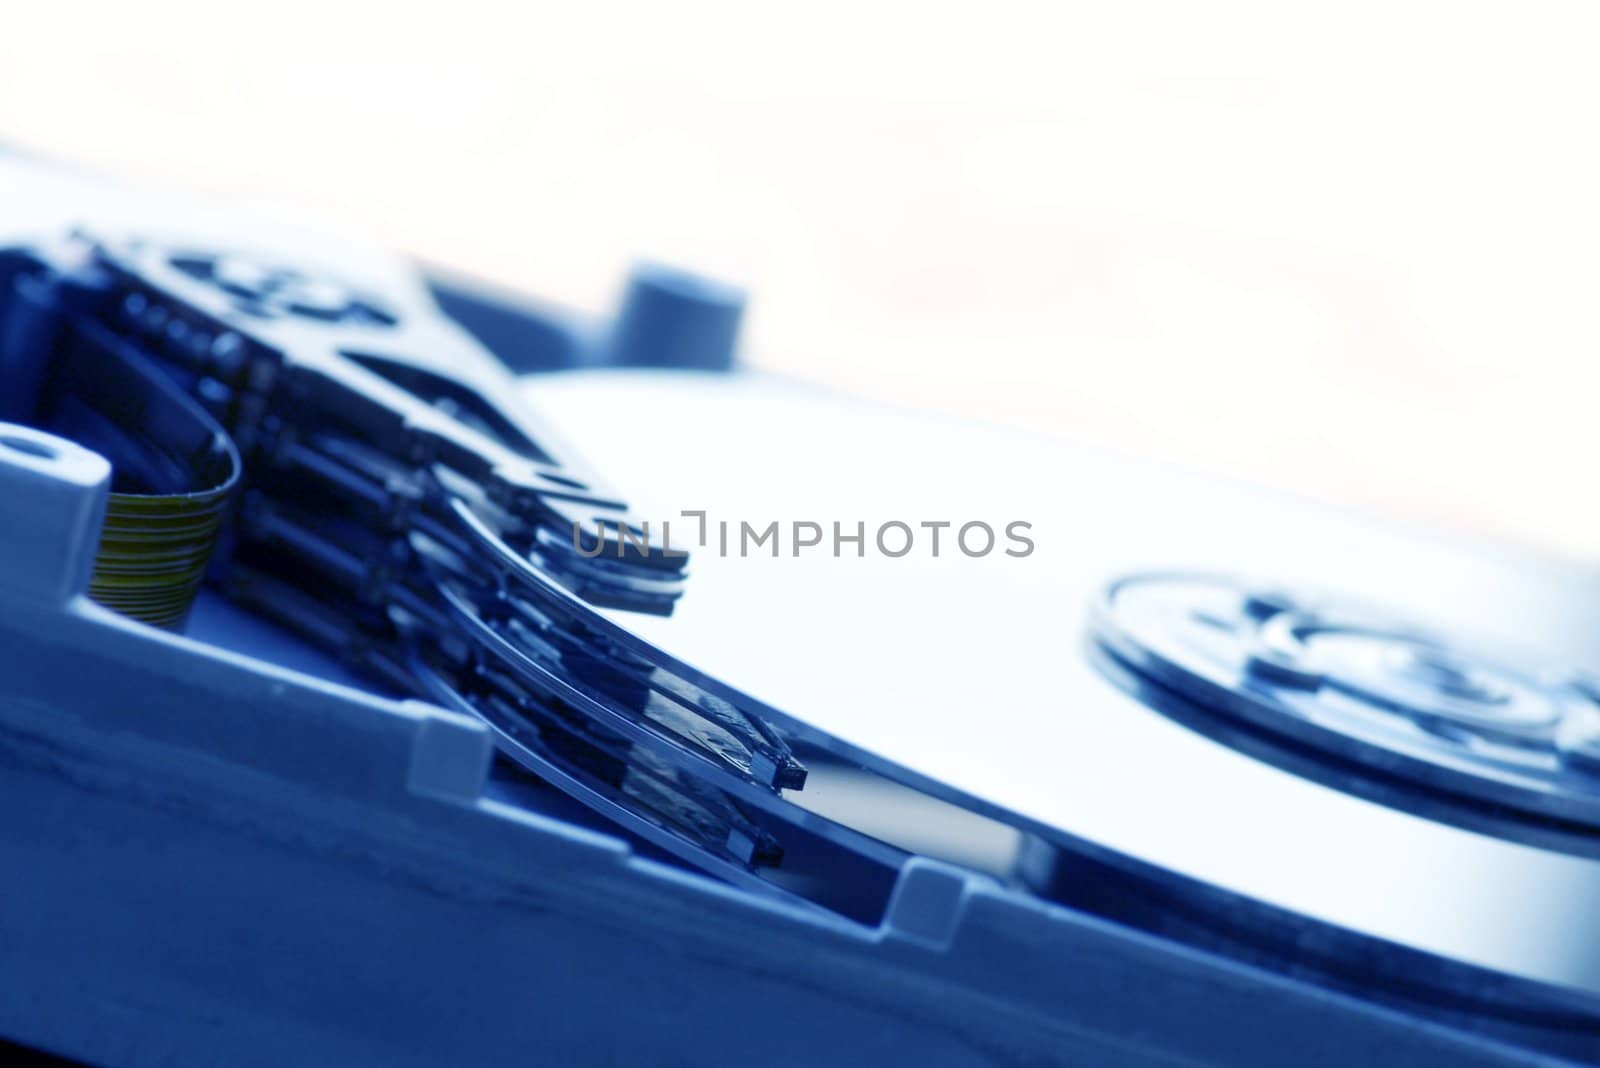 detail of hard disk drive